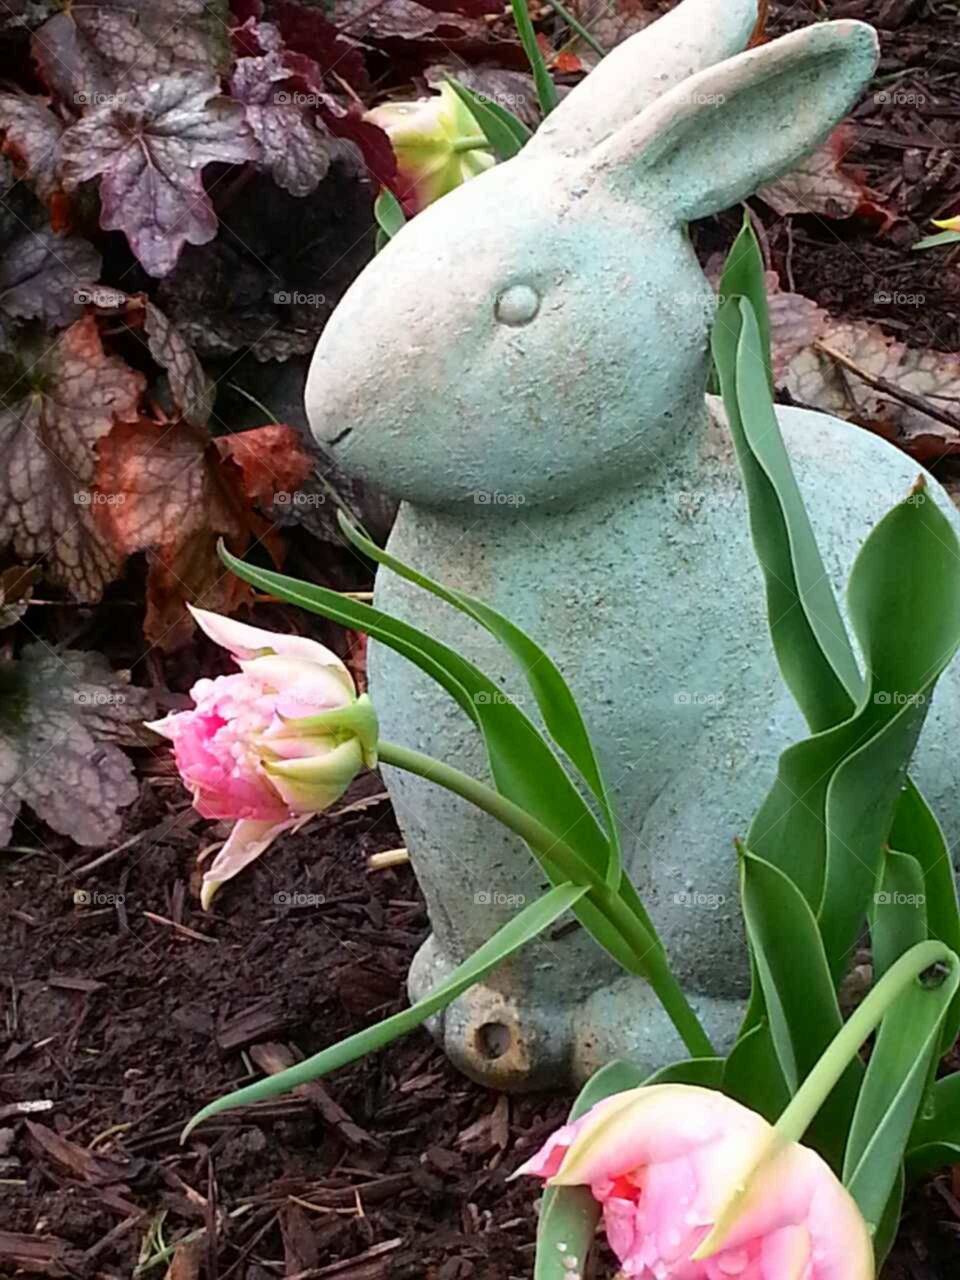 A weathered rabbit statue guards the spring tulips in the flower garden.